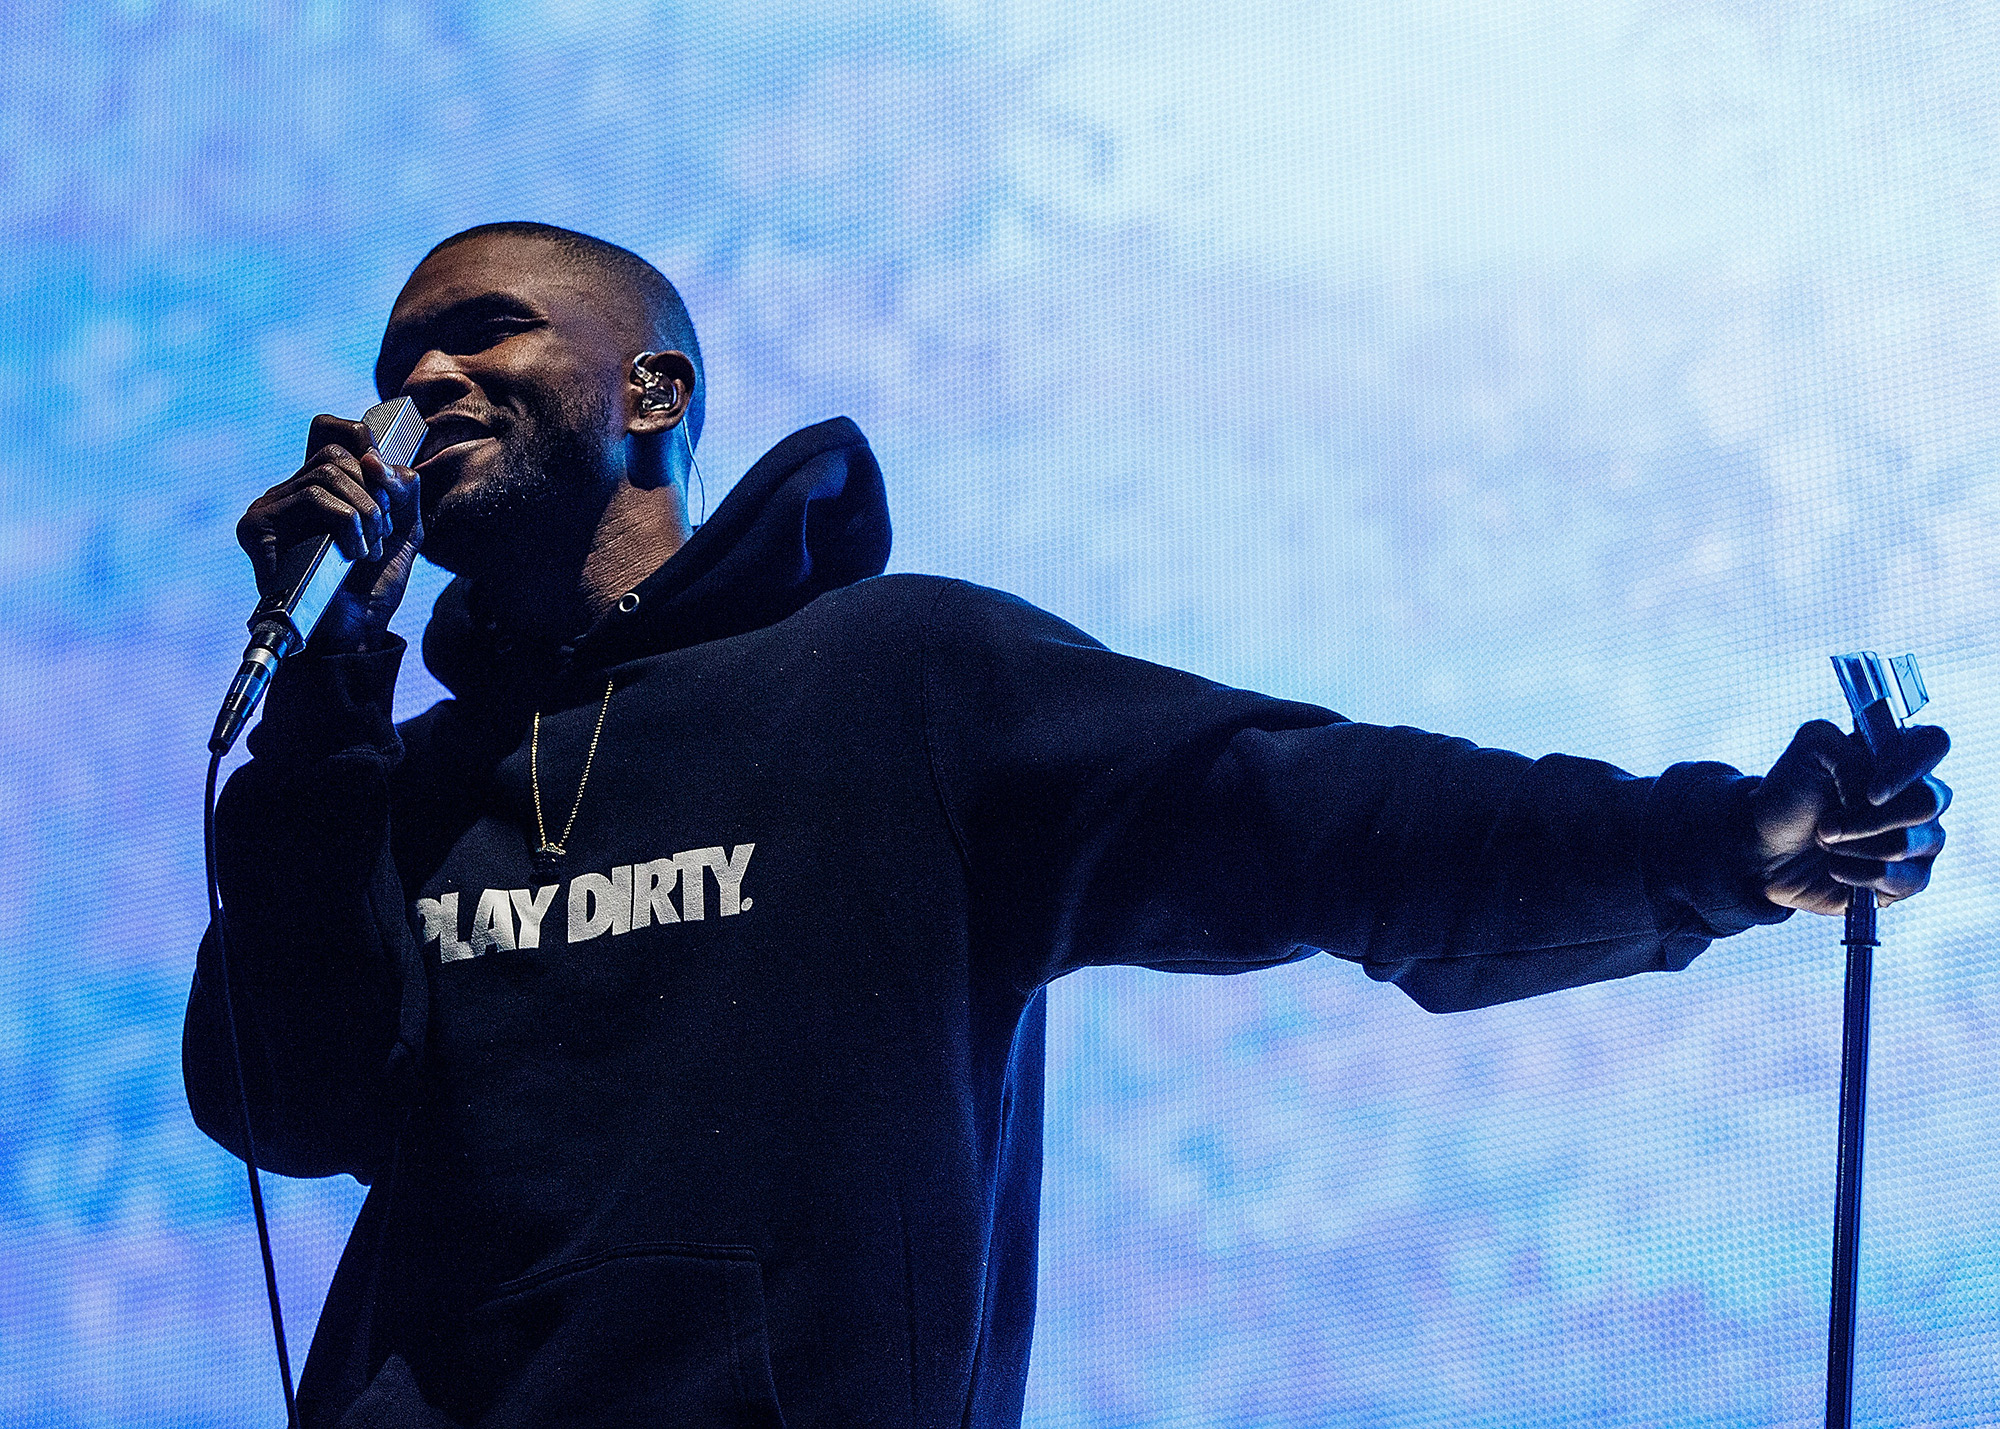 Frank Ocean performs on stage during Day 3 of Pemberton Music and Arts Festival on July 20, 2014 in Pemberton, Canada.  (Photo by Andrew Chin/FilmMagic) (Andrew Chin&mdash;FilmMagic)